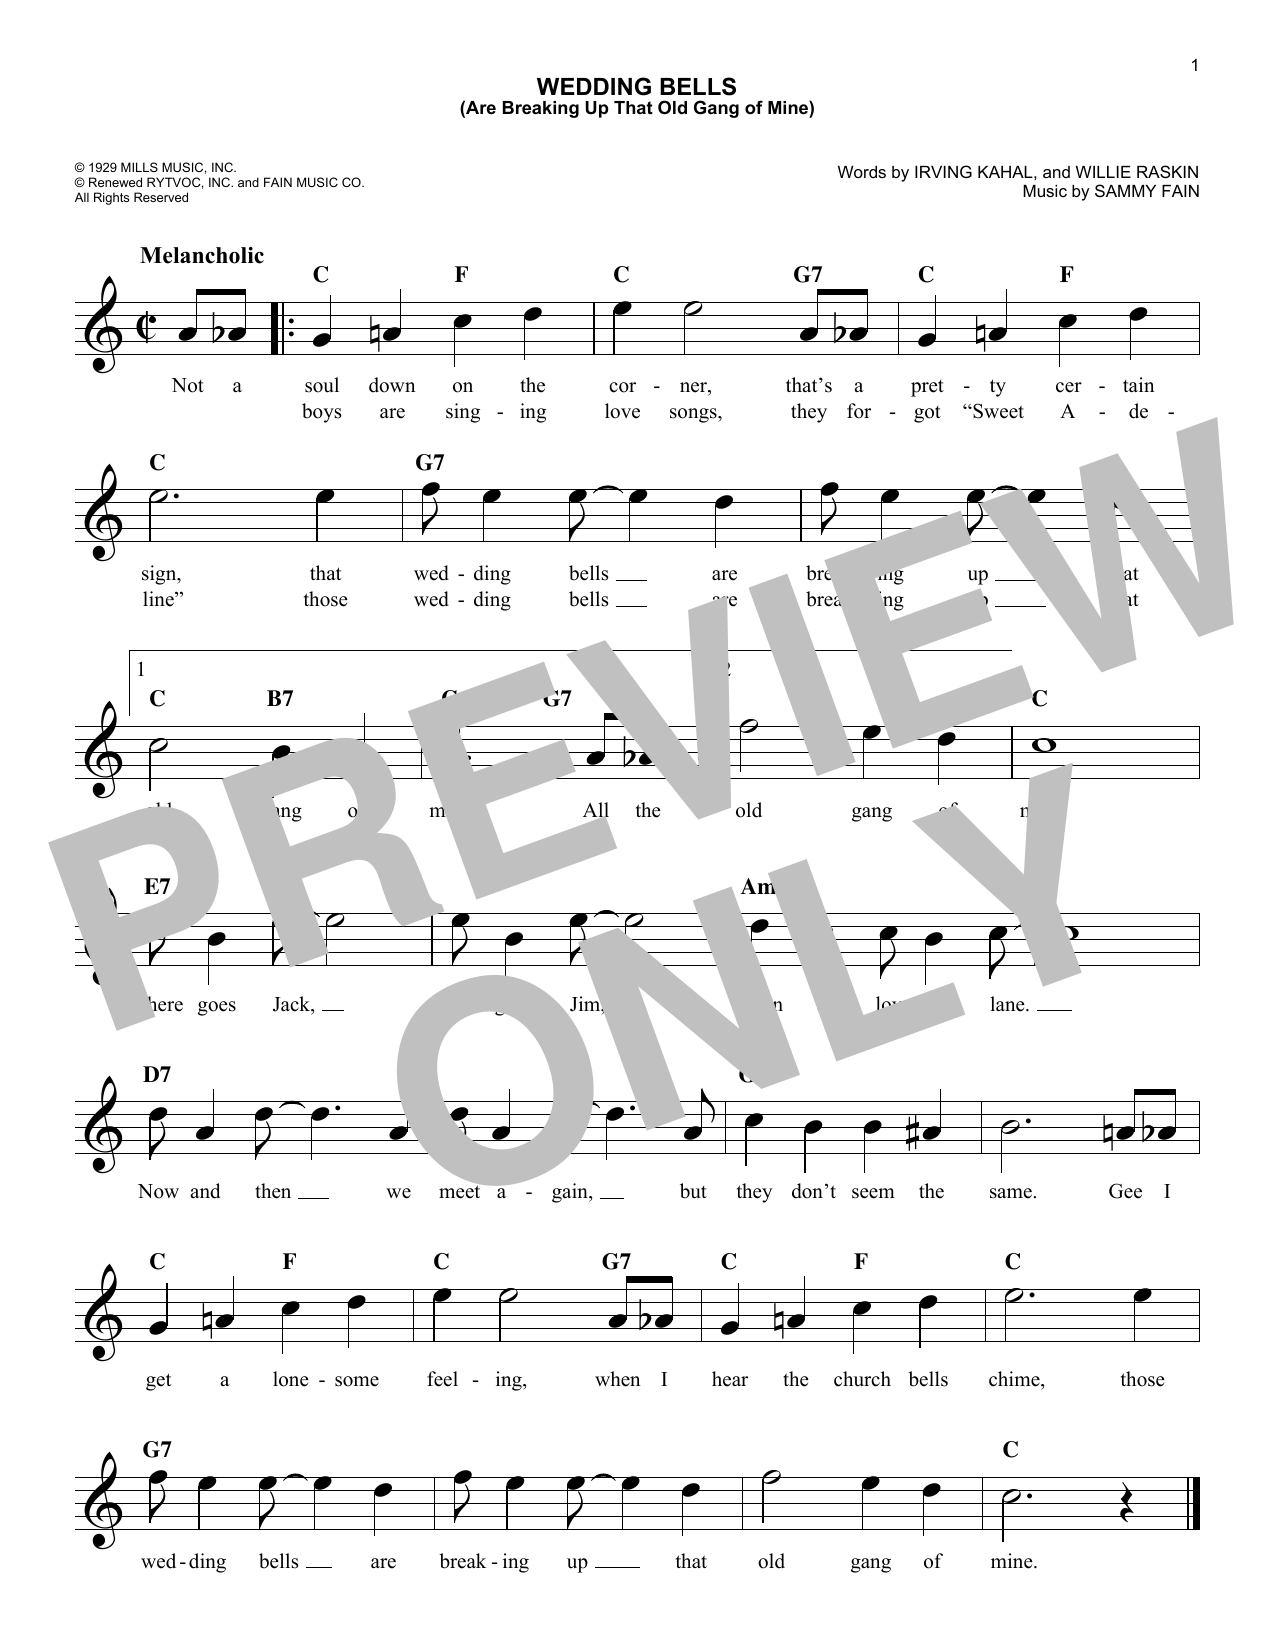 Willie Raskin Wedding Bells (Are Breaking Up That Old Gang Of Mine) sheet music notes and chords. Download Printable PDF.